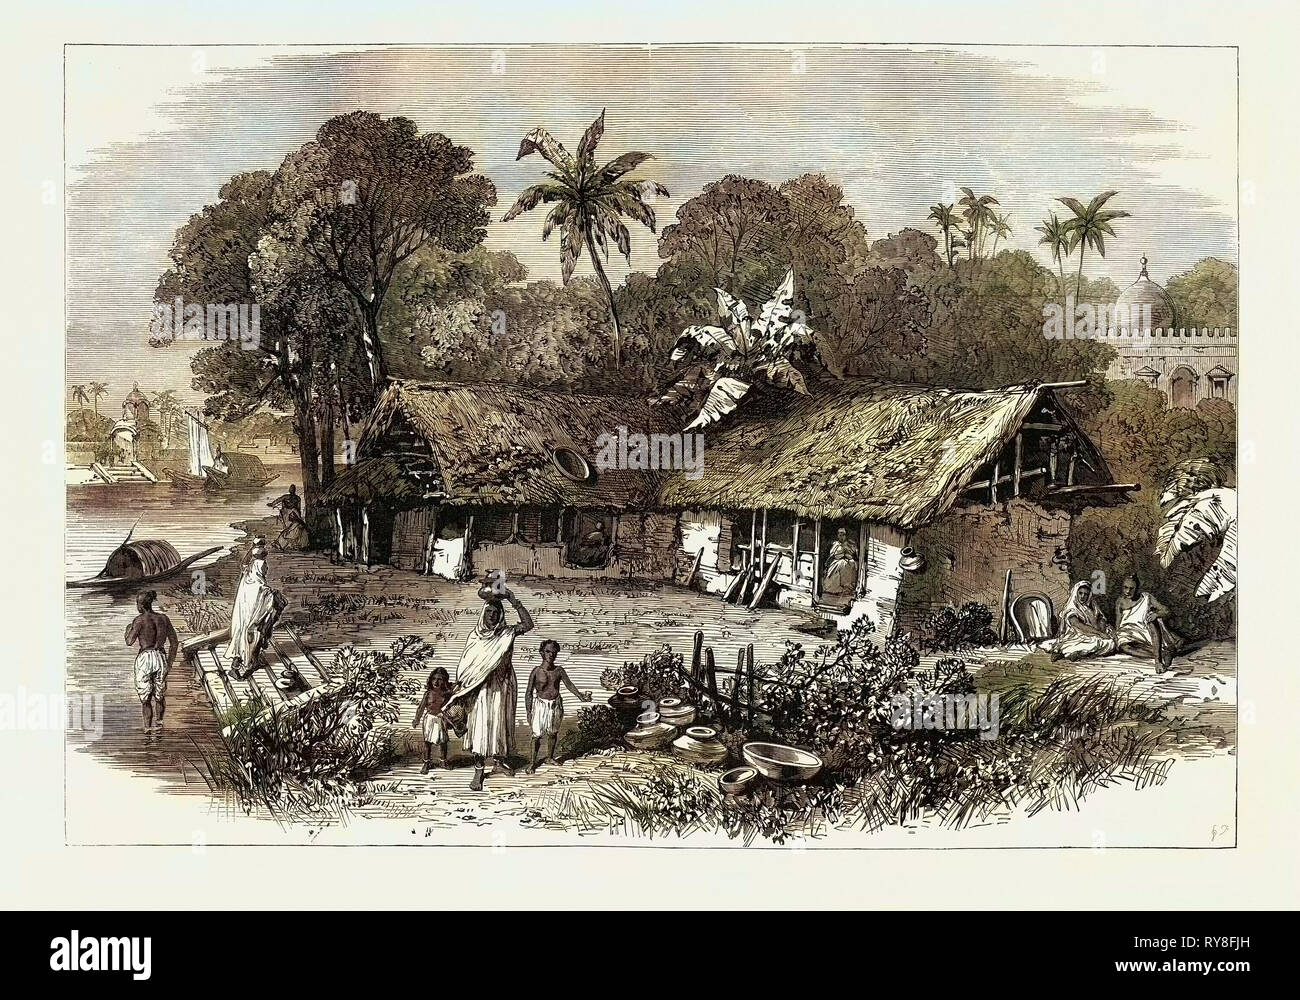 The Famine in India: A Bengal Village 1874 Stock Photo